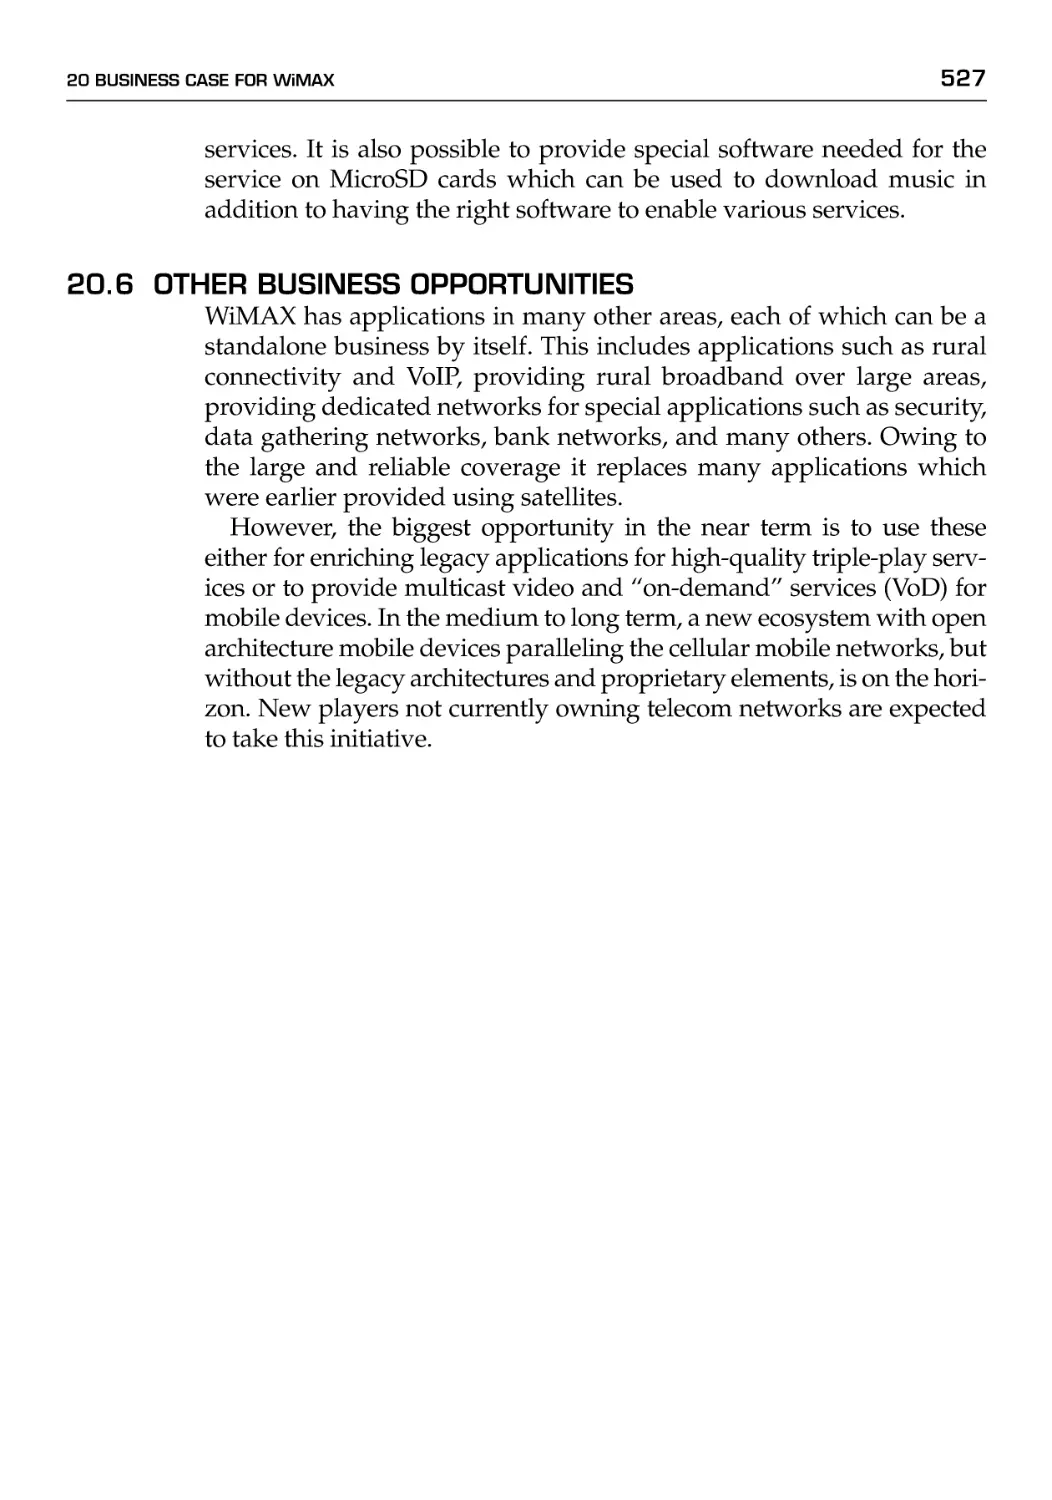 20.6 Other Business Opportunities